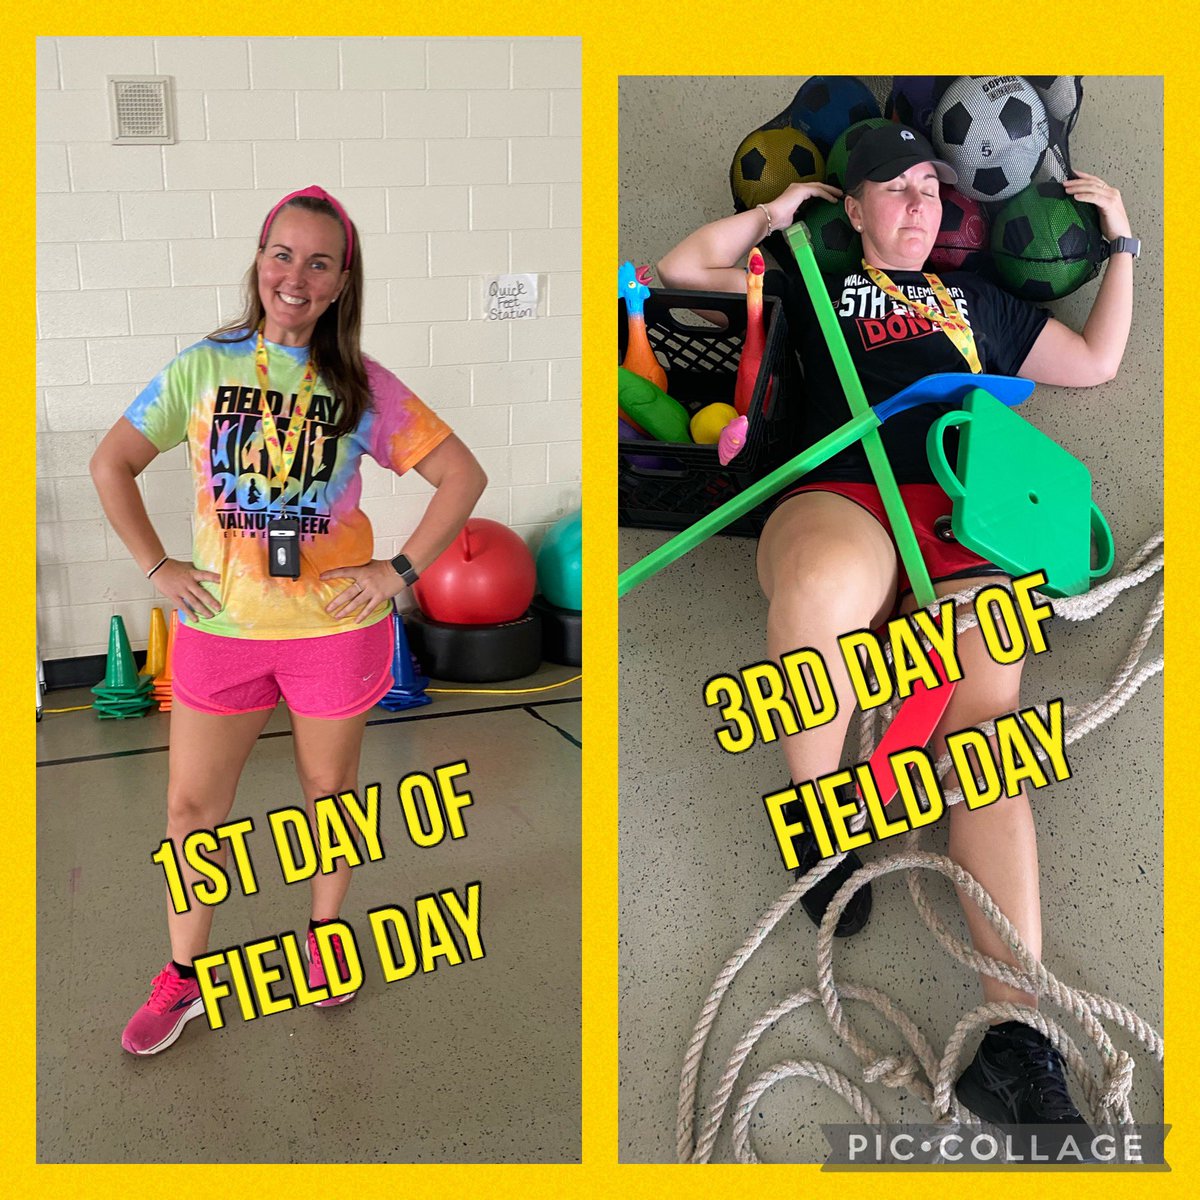 #FieldDay2024 is in the books! Here is 1st day of #FieldDay vs 3rd day of #FieldDay. 
Best days of the year!!!! Thank you, Wallabies, for 3 great days!!! @WCE_HCS @HPE_HCS